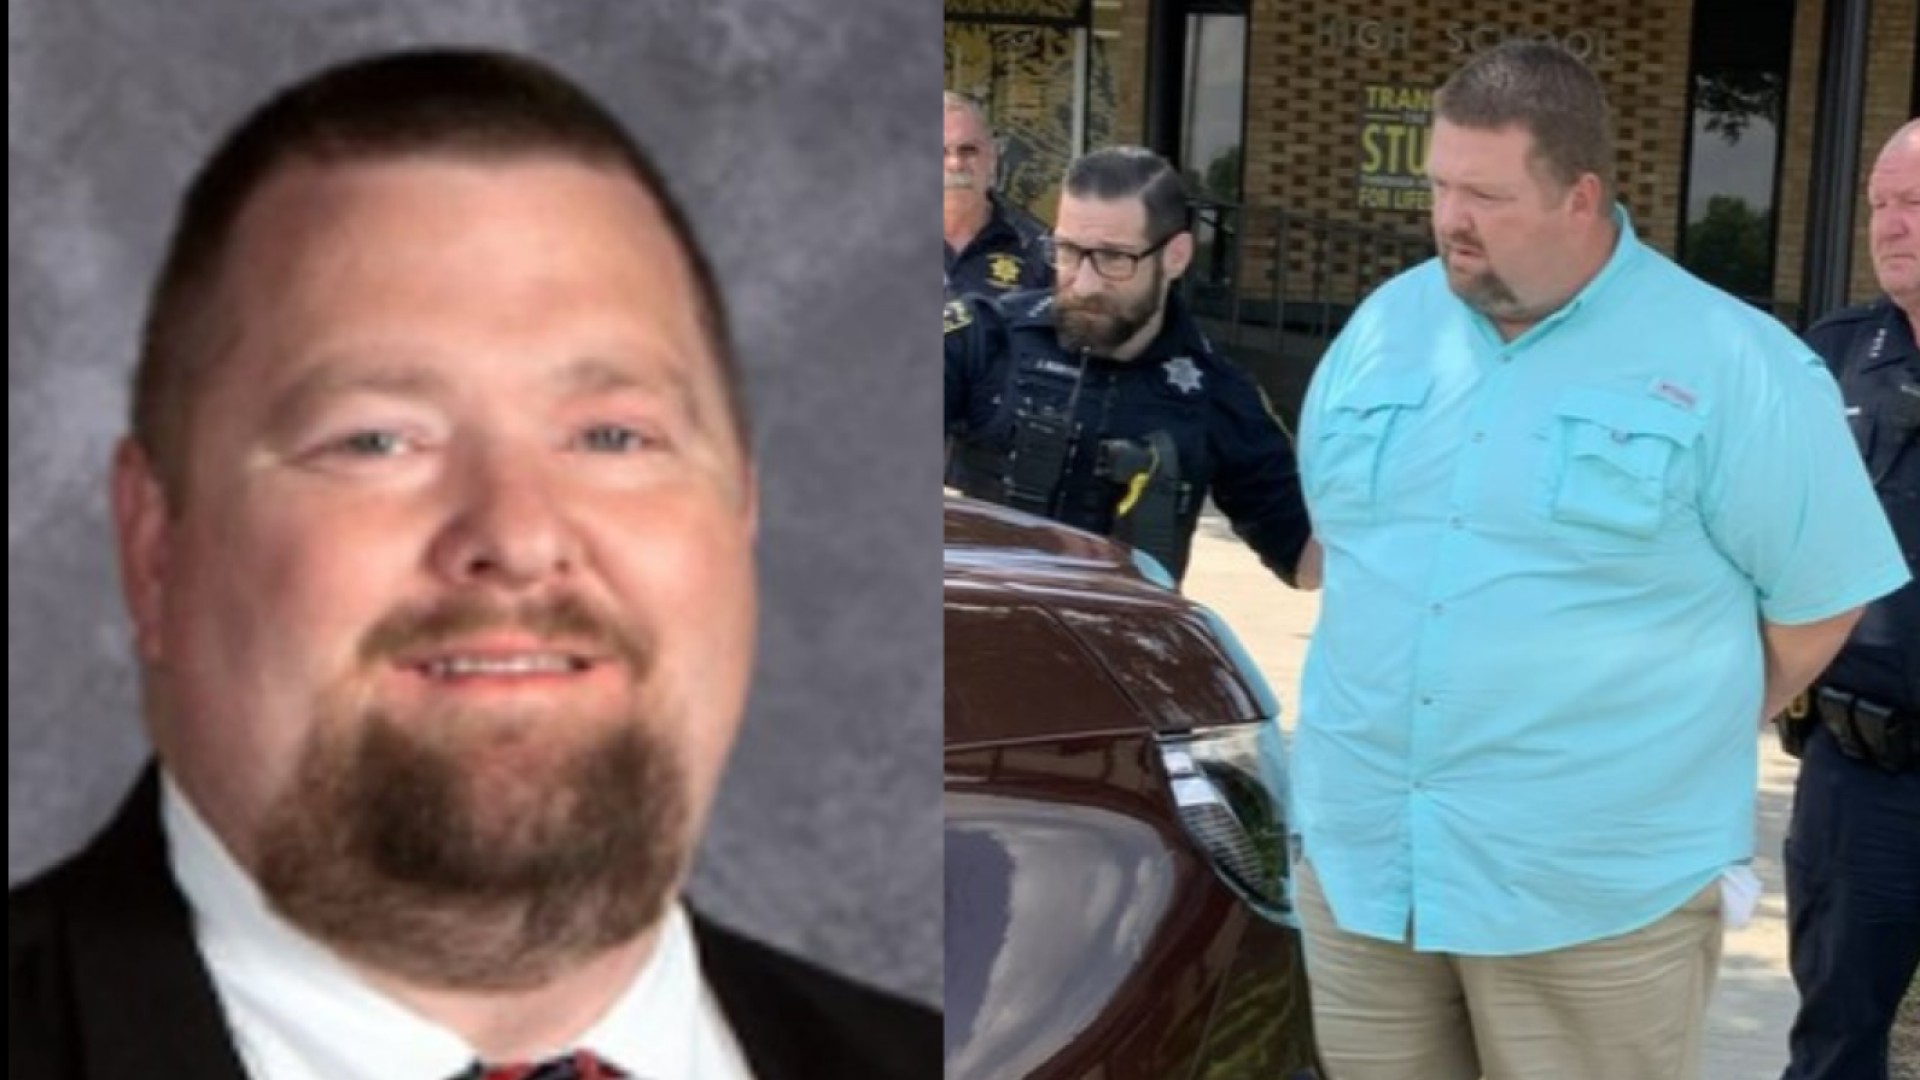 North Texas school district superintendent charged for planning to drive to Houston to meet 15-year-old girl for picture